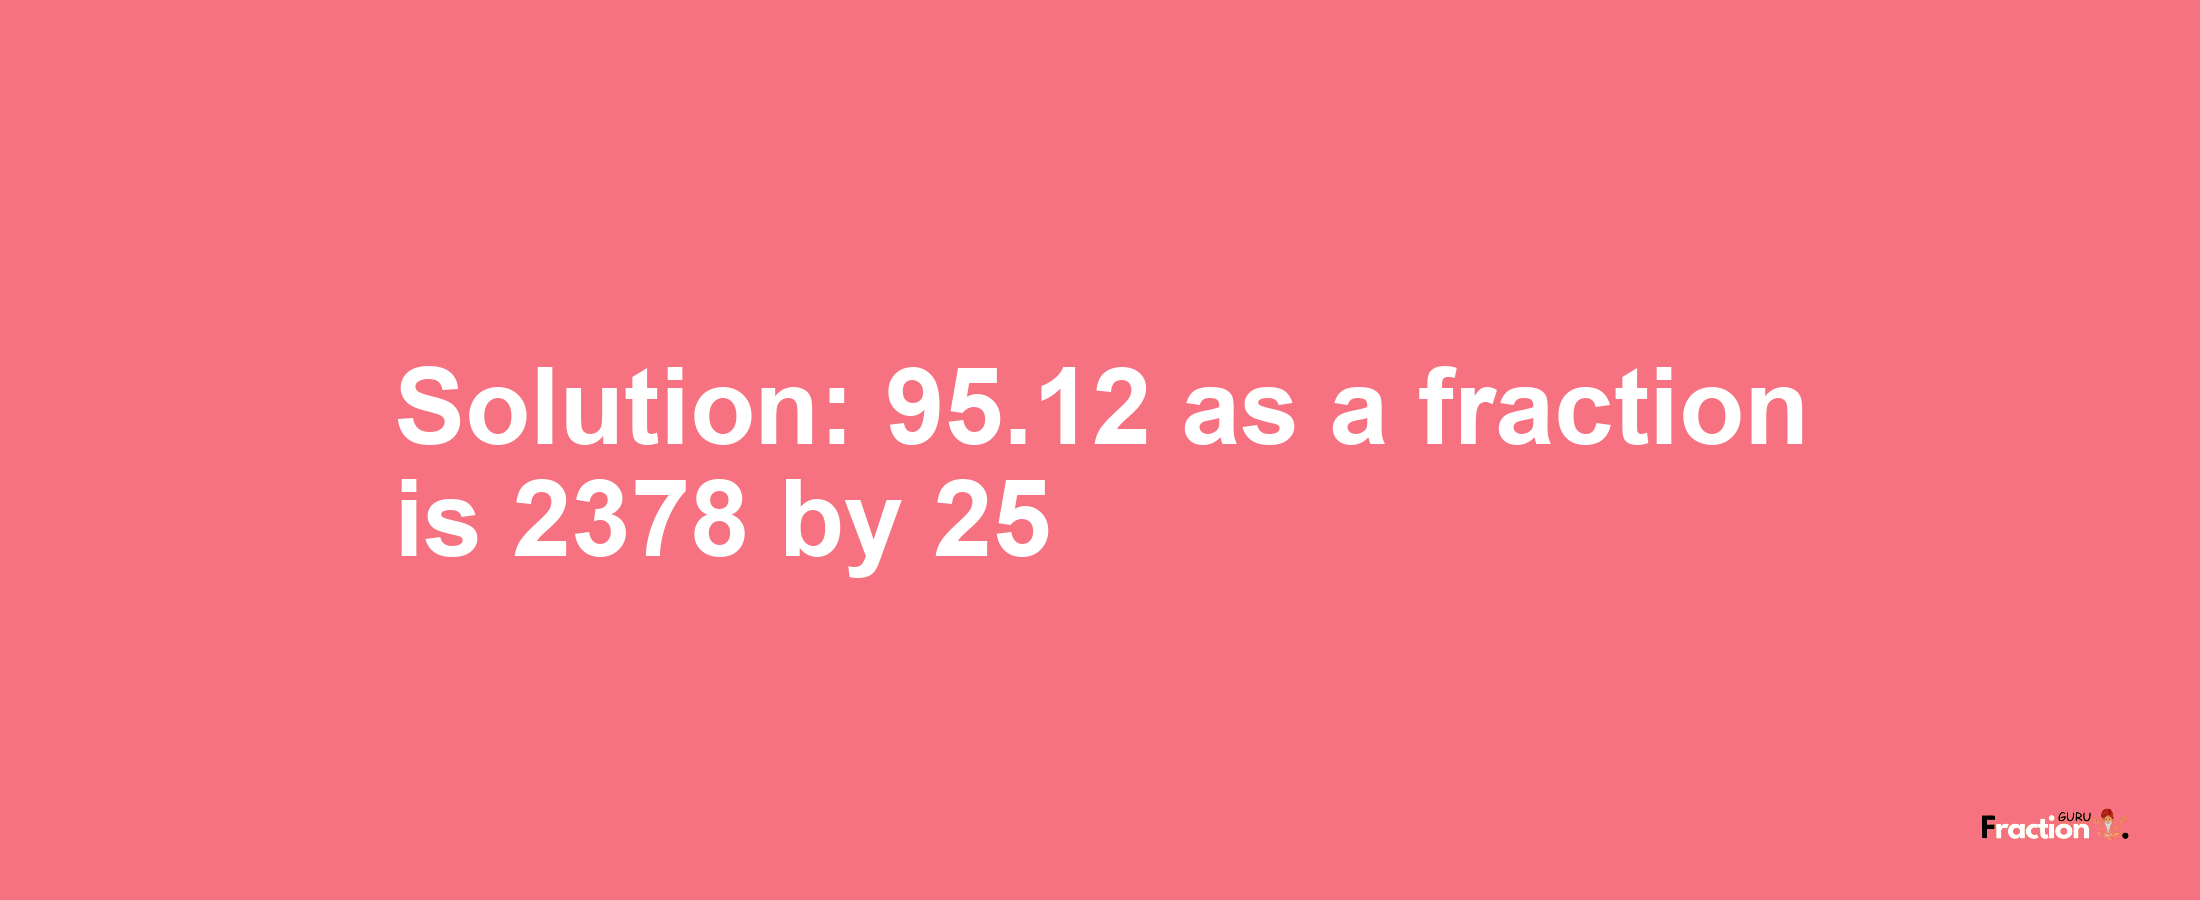 Solution:95.12 as a fraction is 2378/25